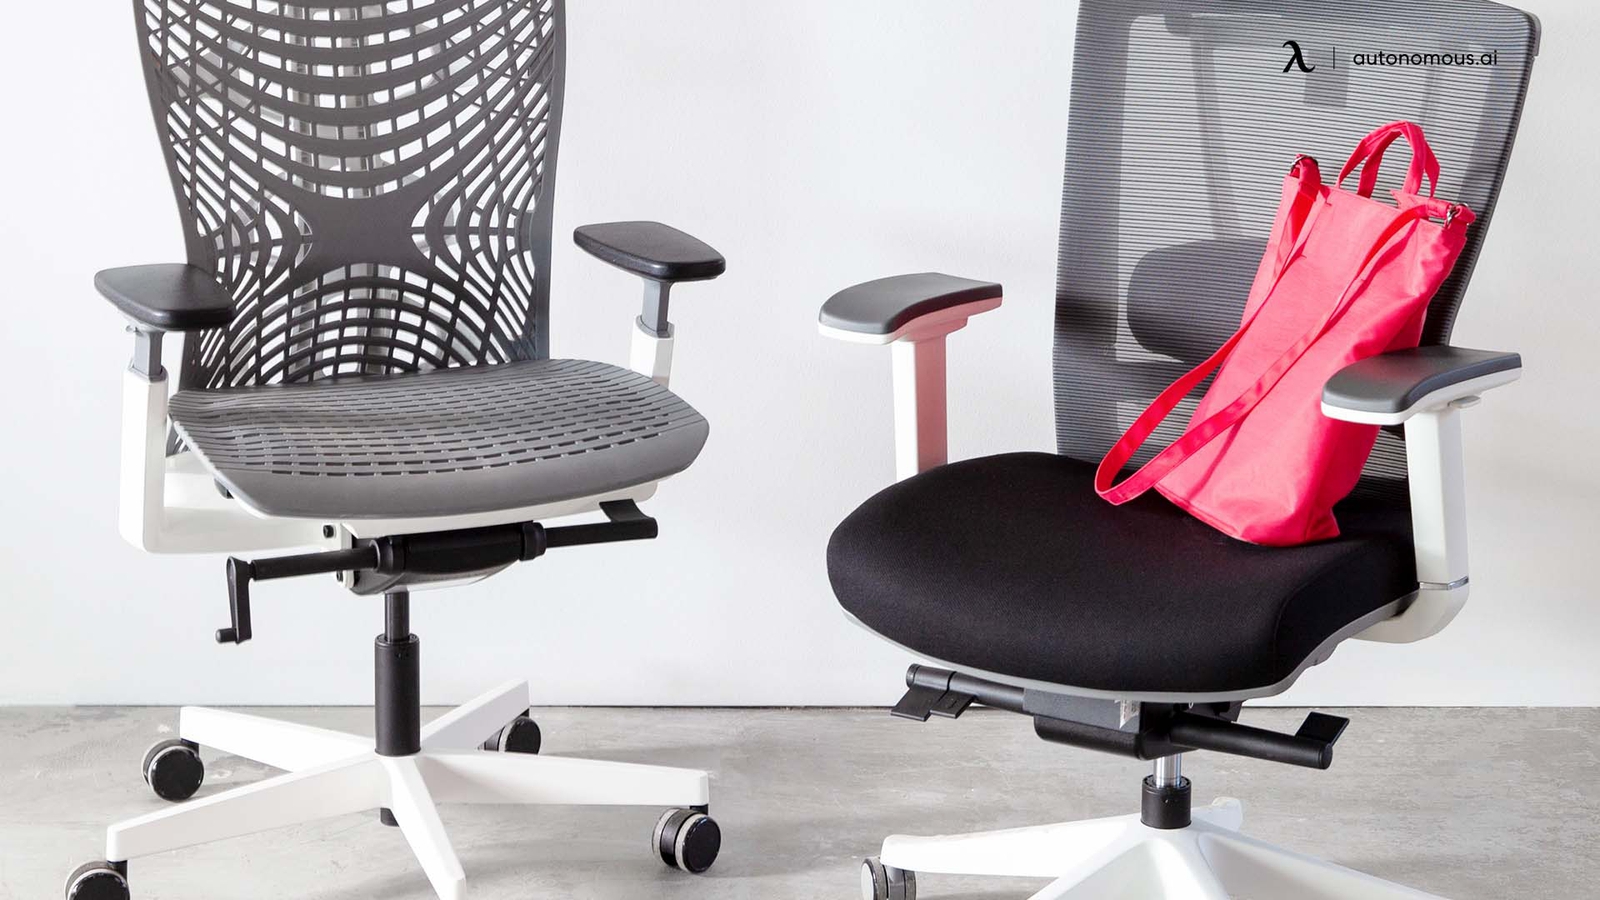 The 20 Best Light Gray Office Chairs: Ergonomic for Any Office